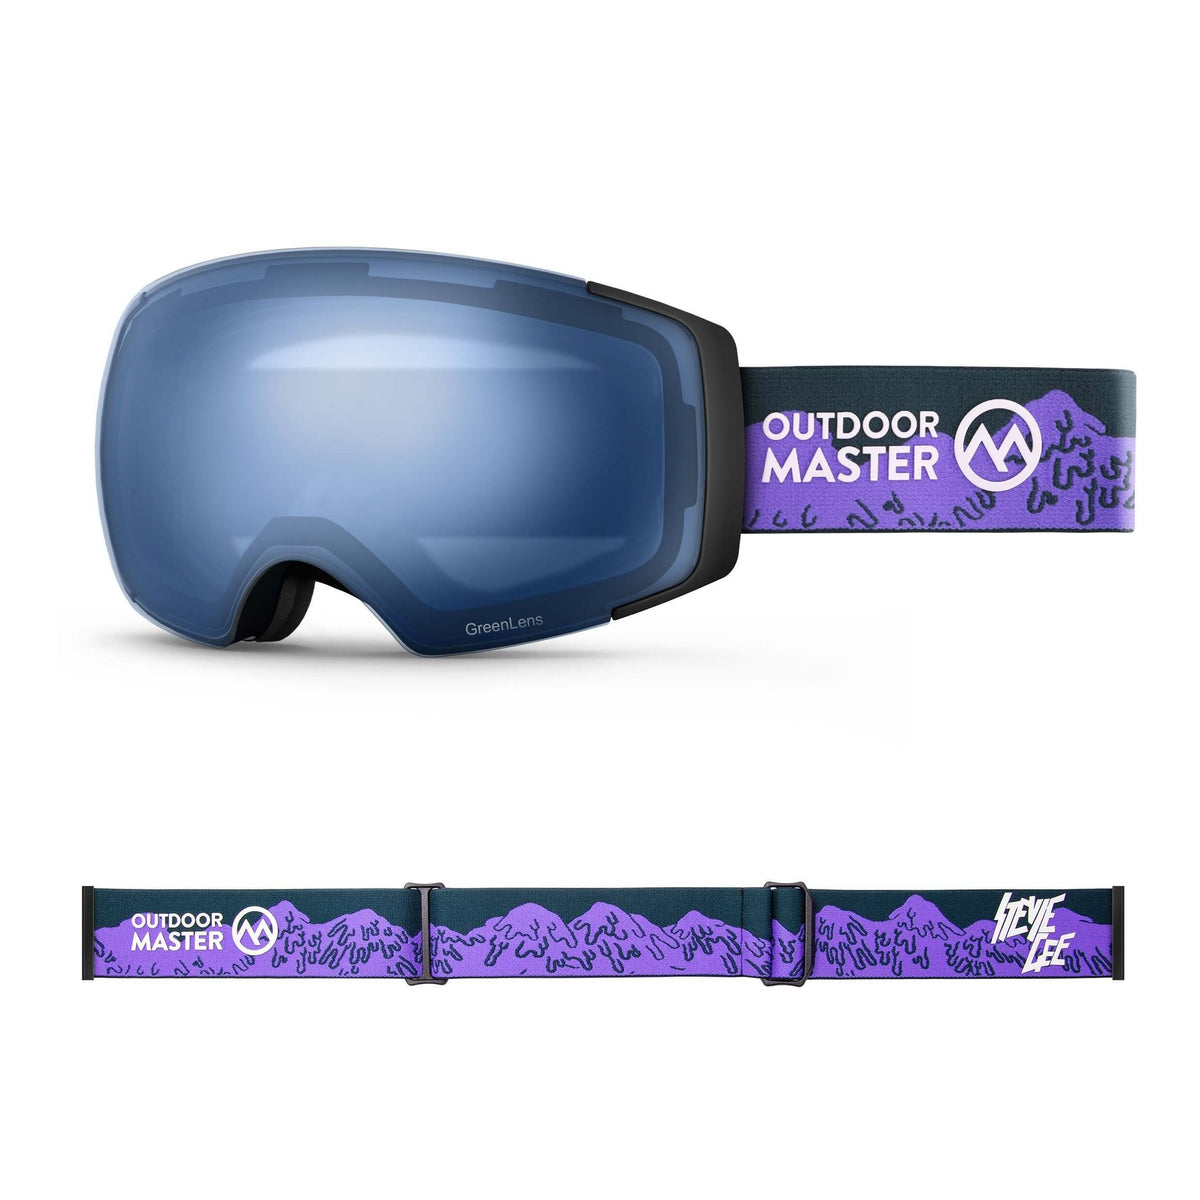 OutdoorMaster x Stevie Gee Goggles Pro Series Limited Edition OutdoorMaster